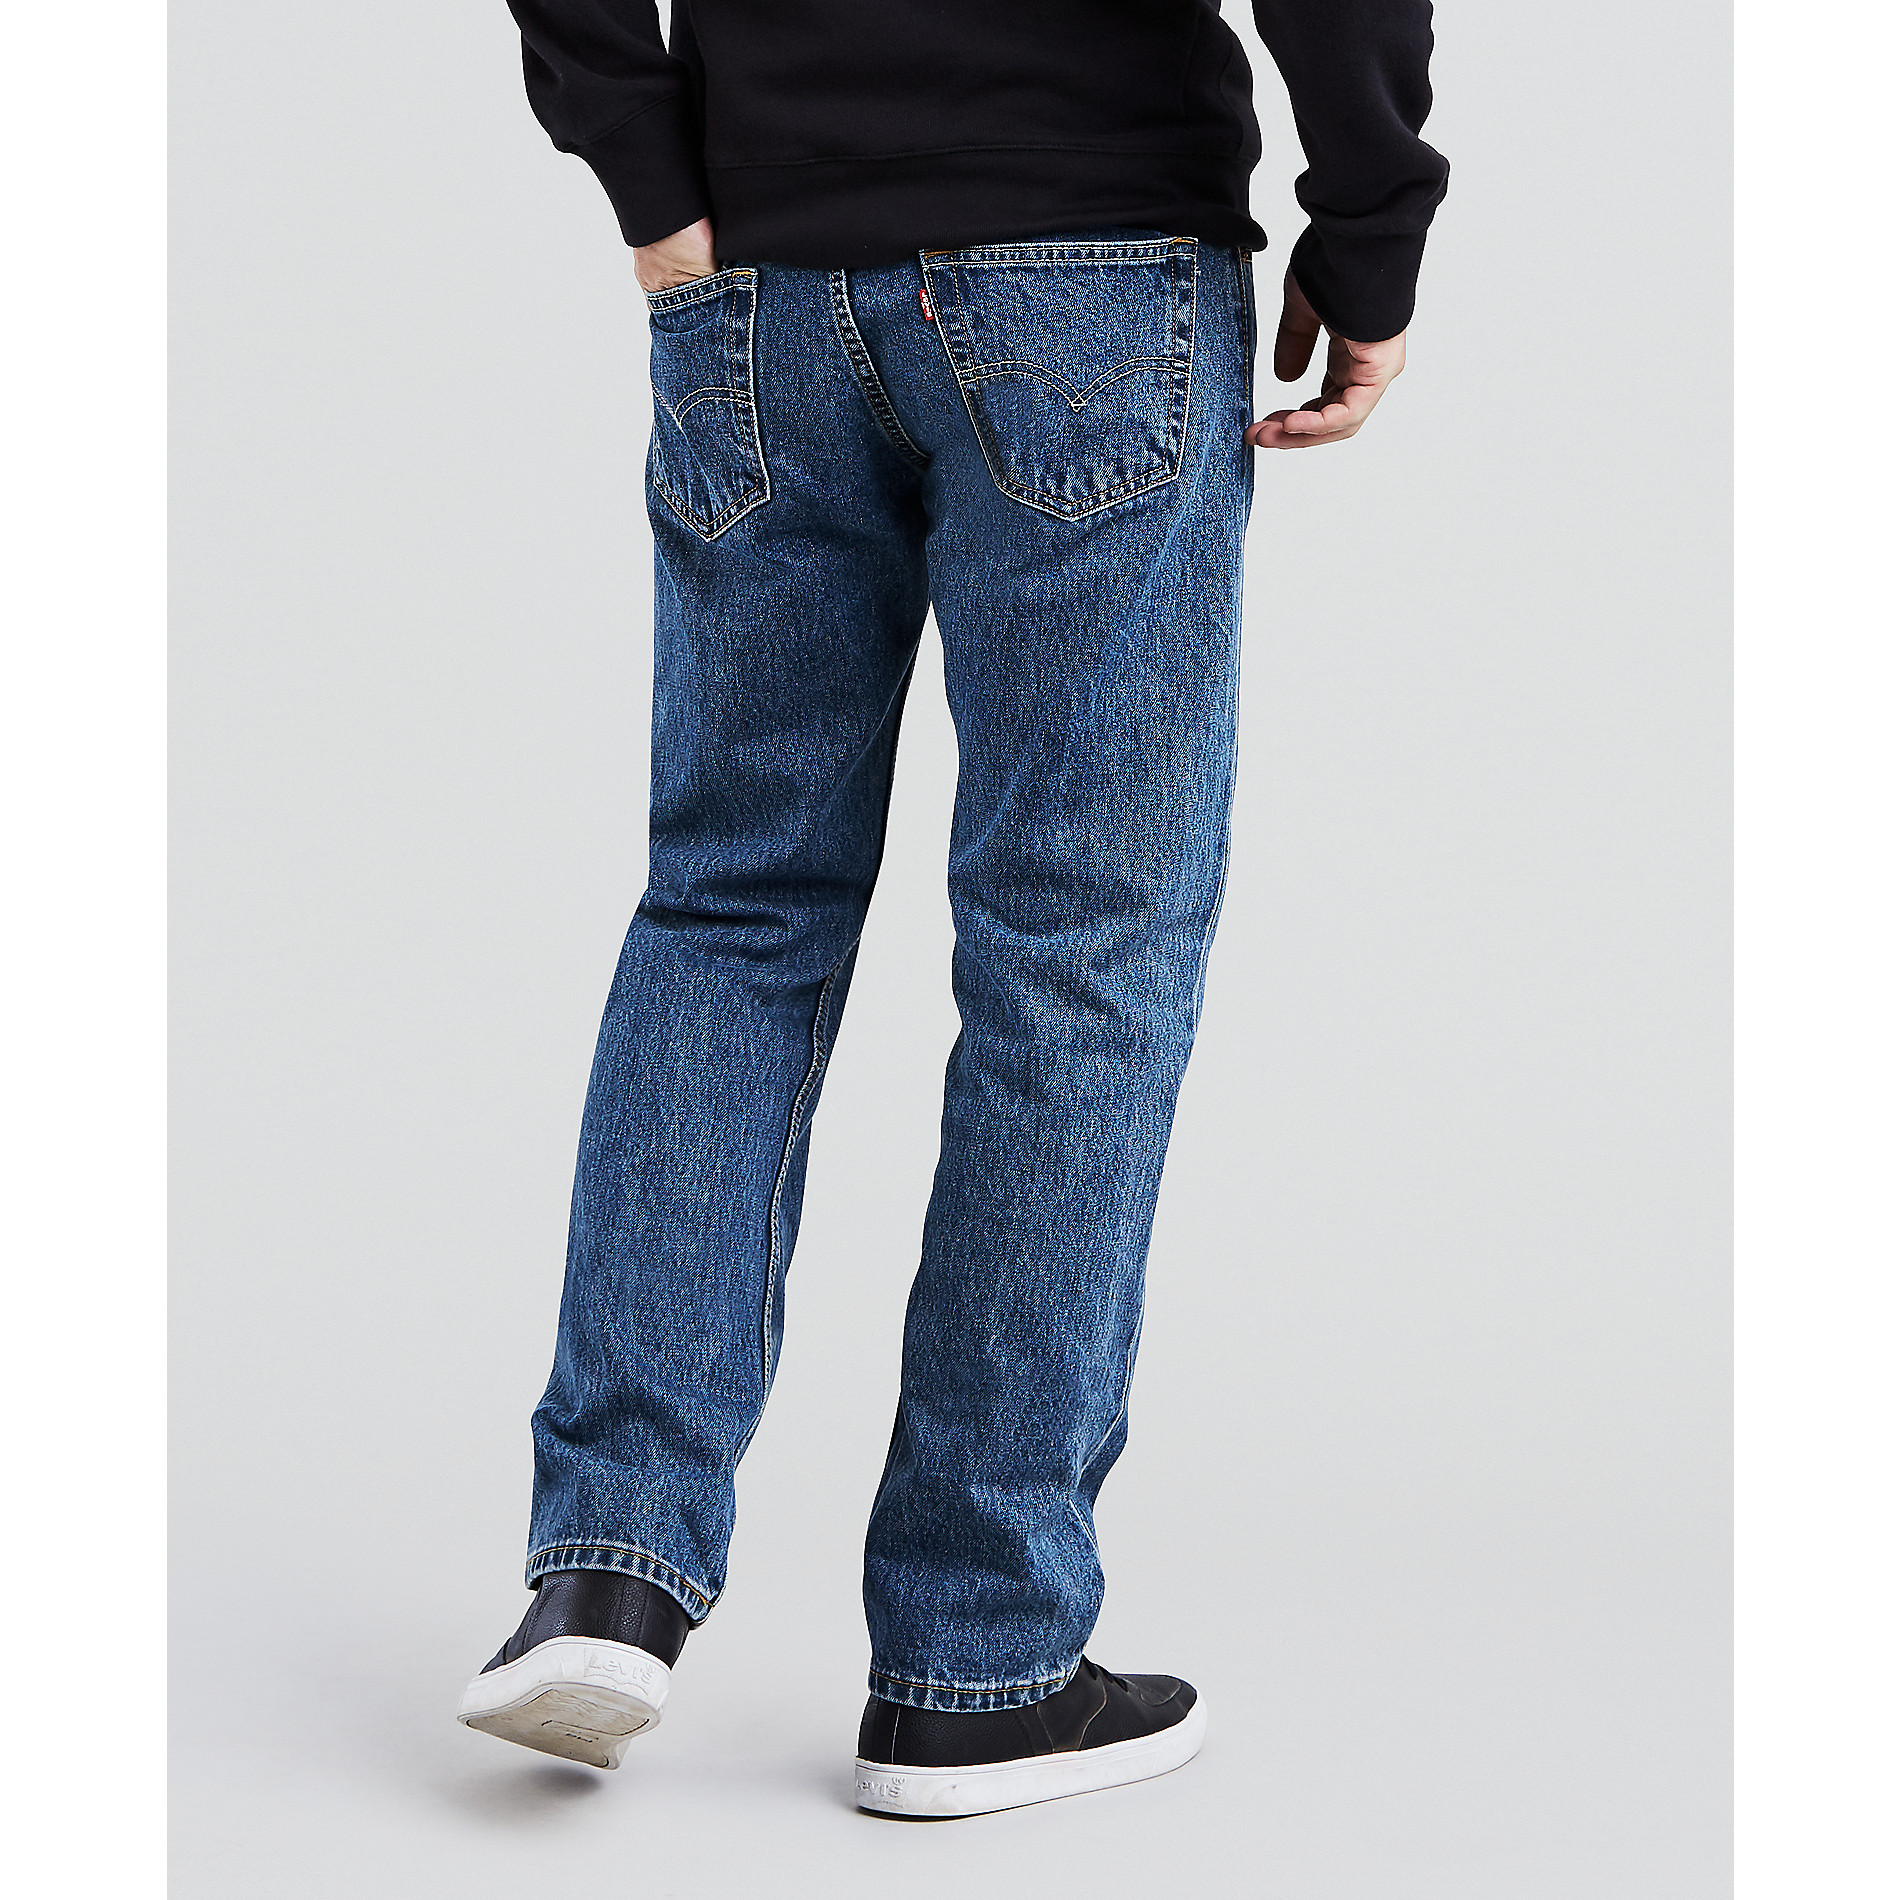 mens levis 505 relaxed fit